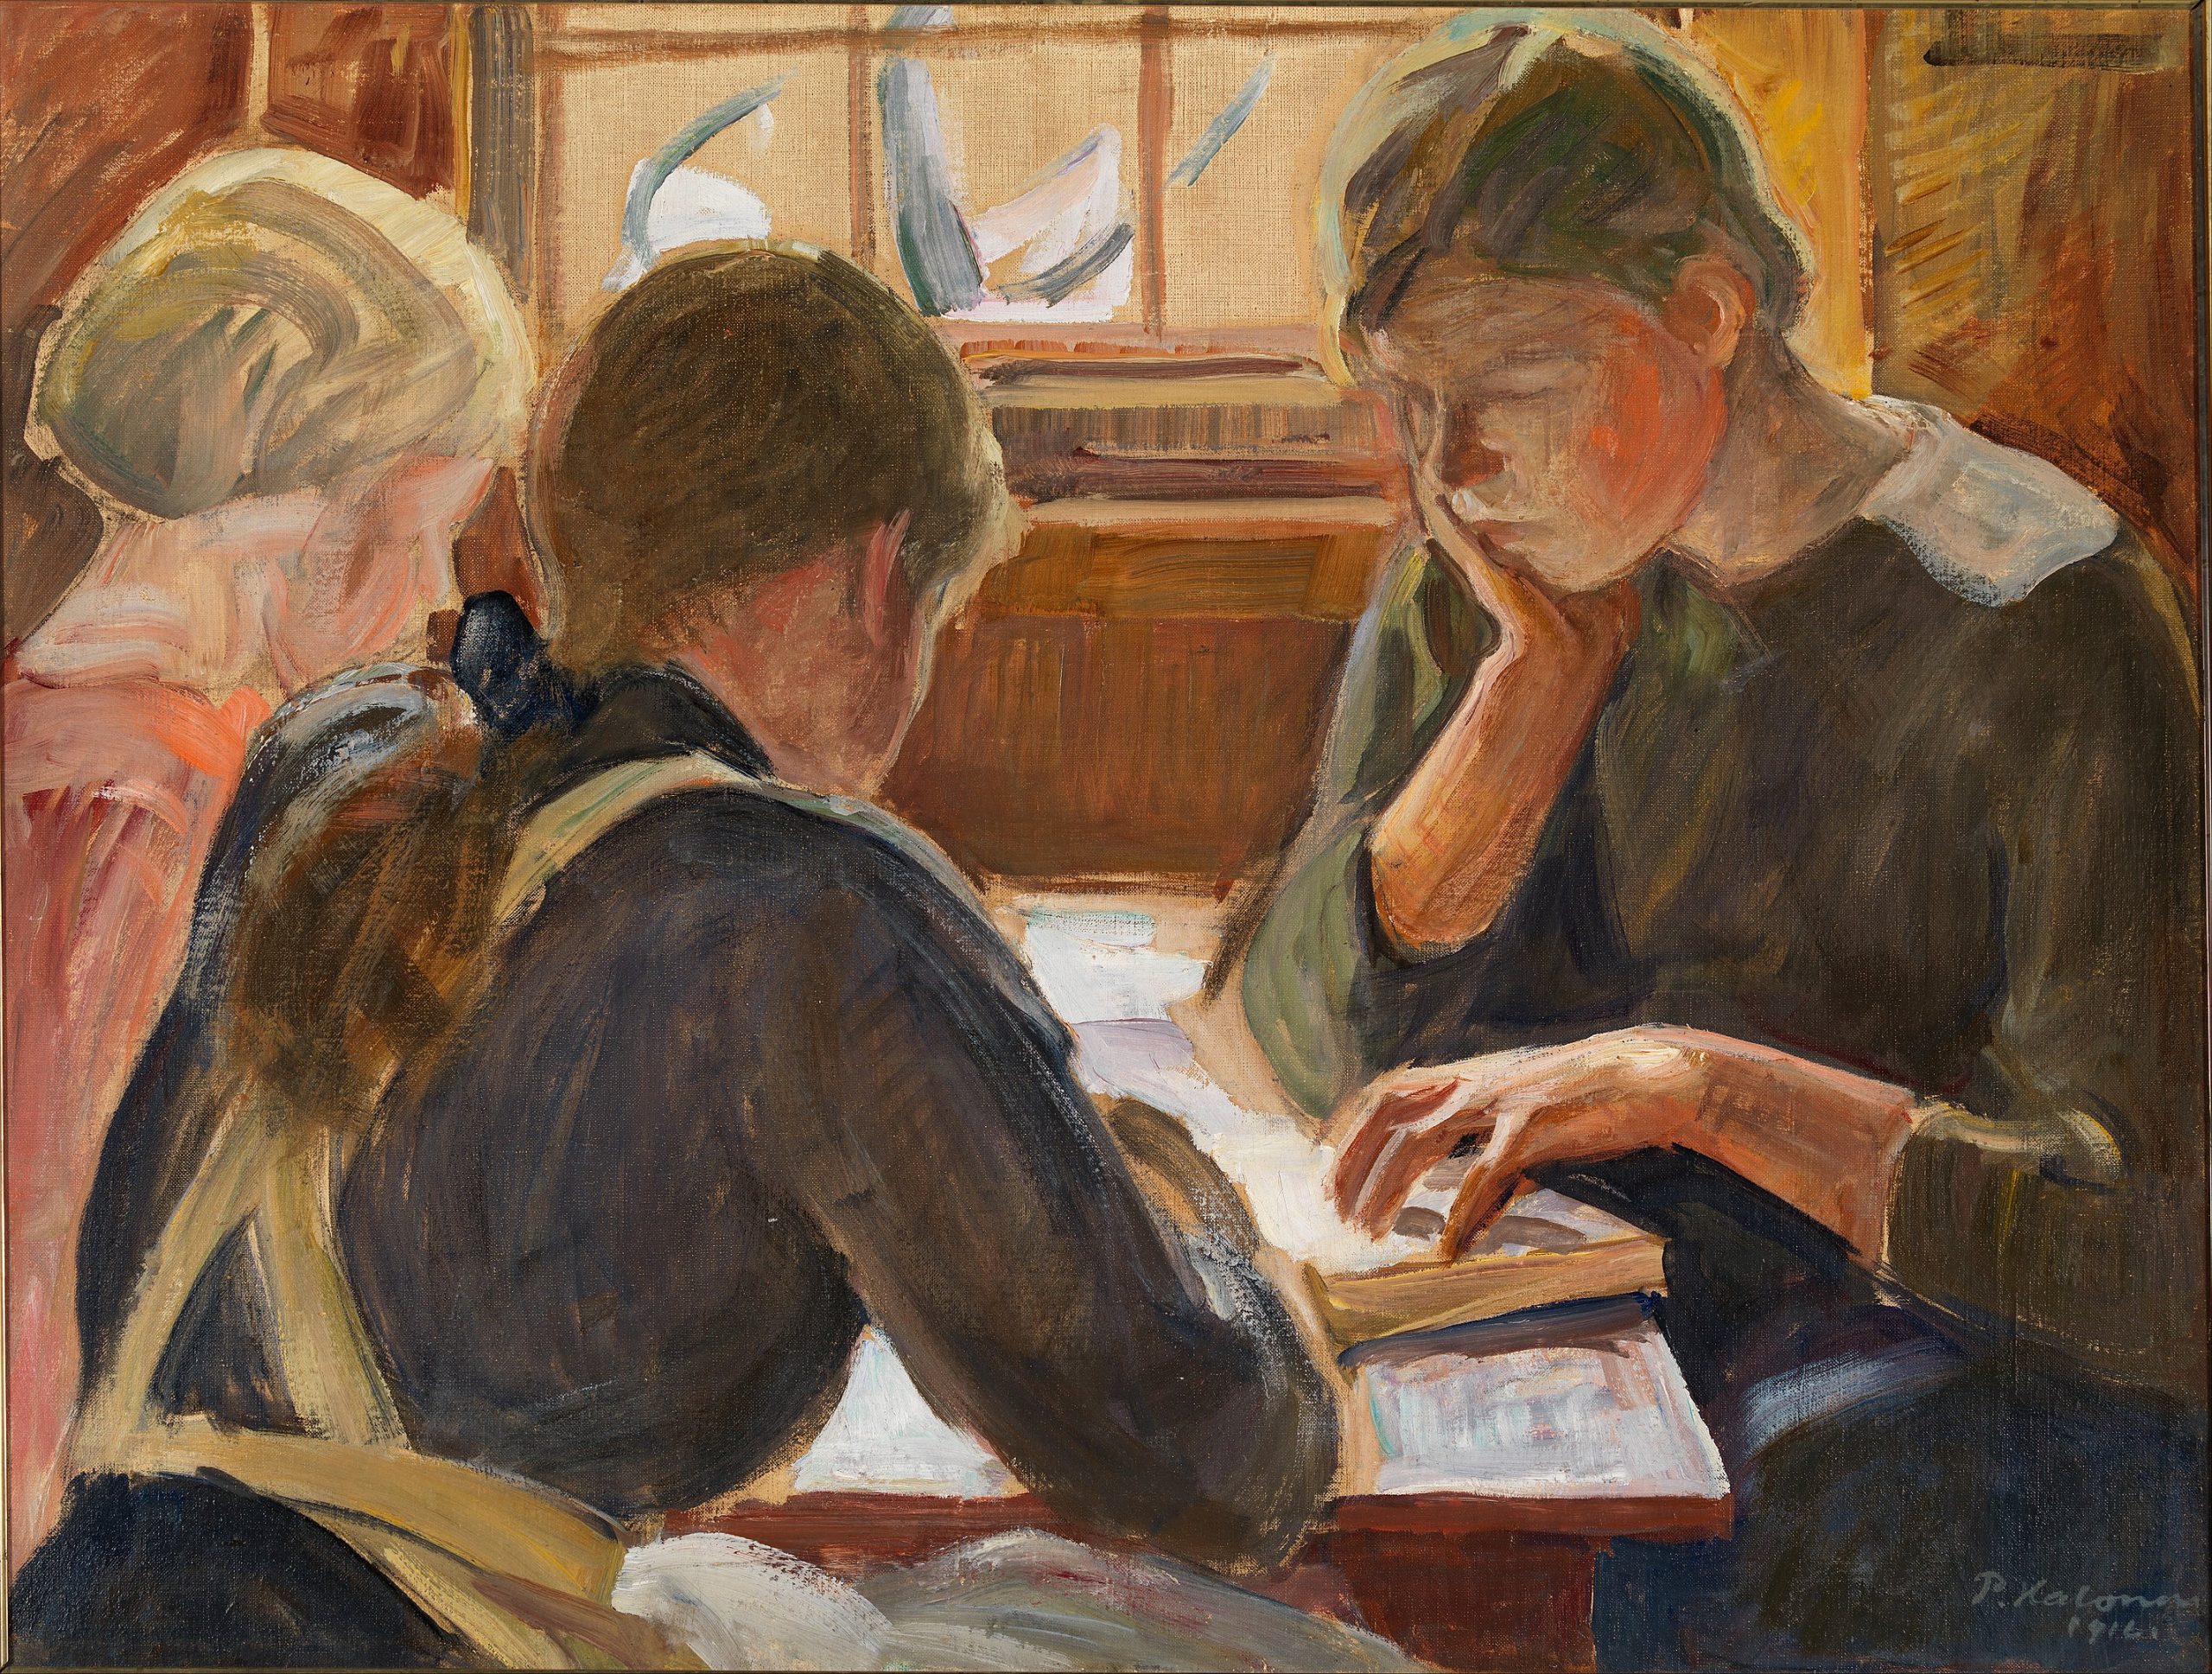 Three children reading books on a table by a window